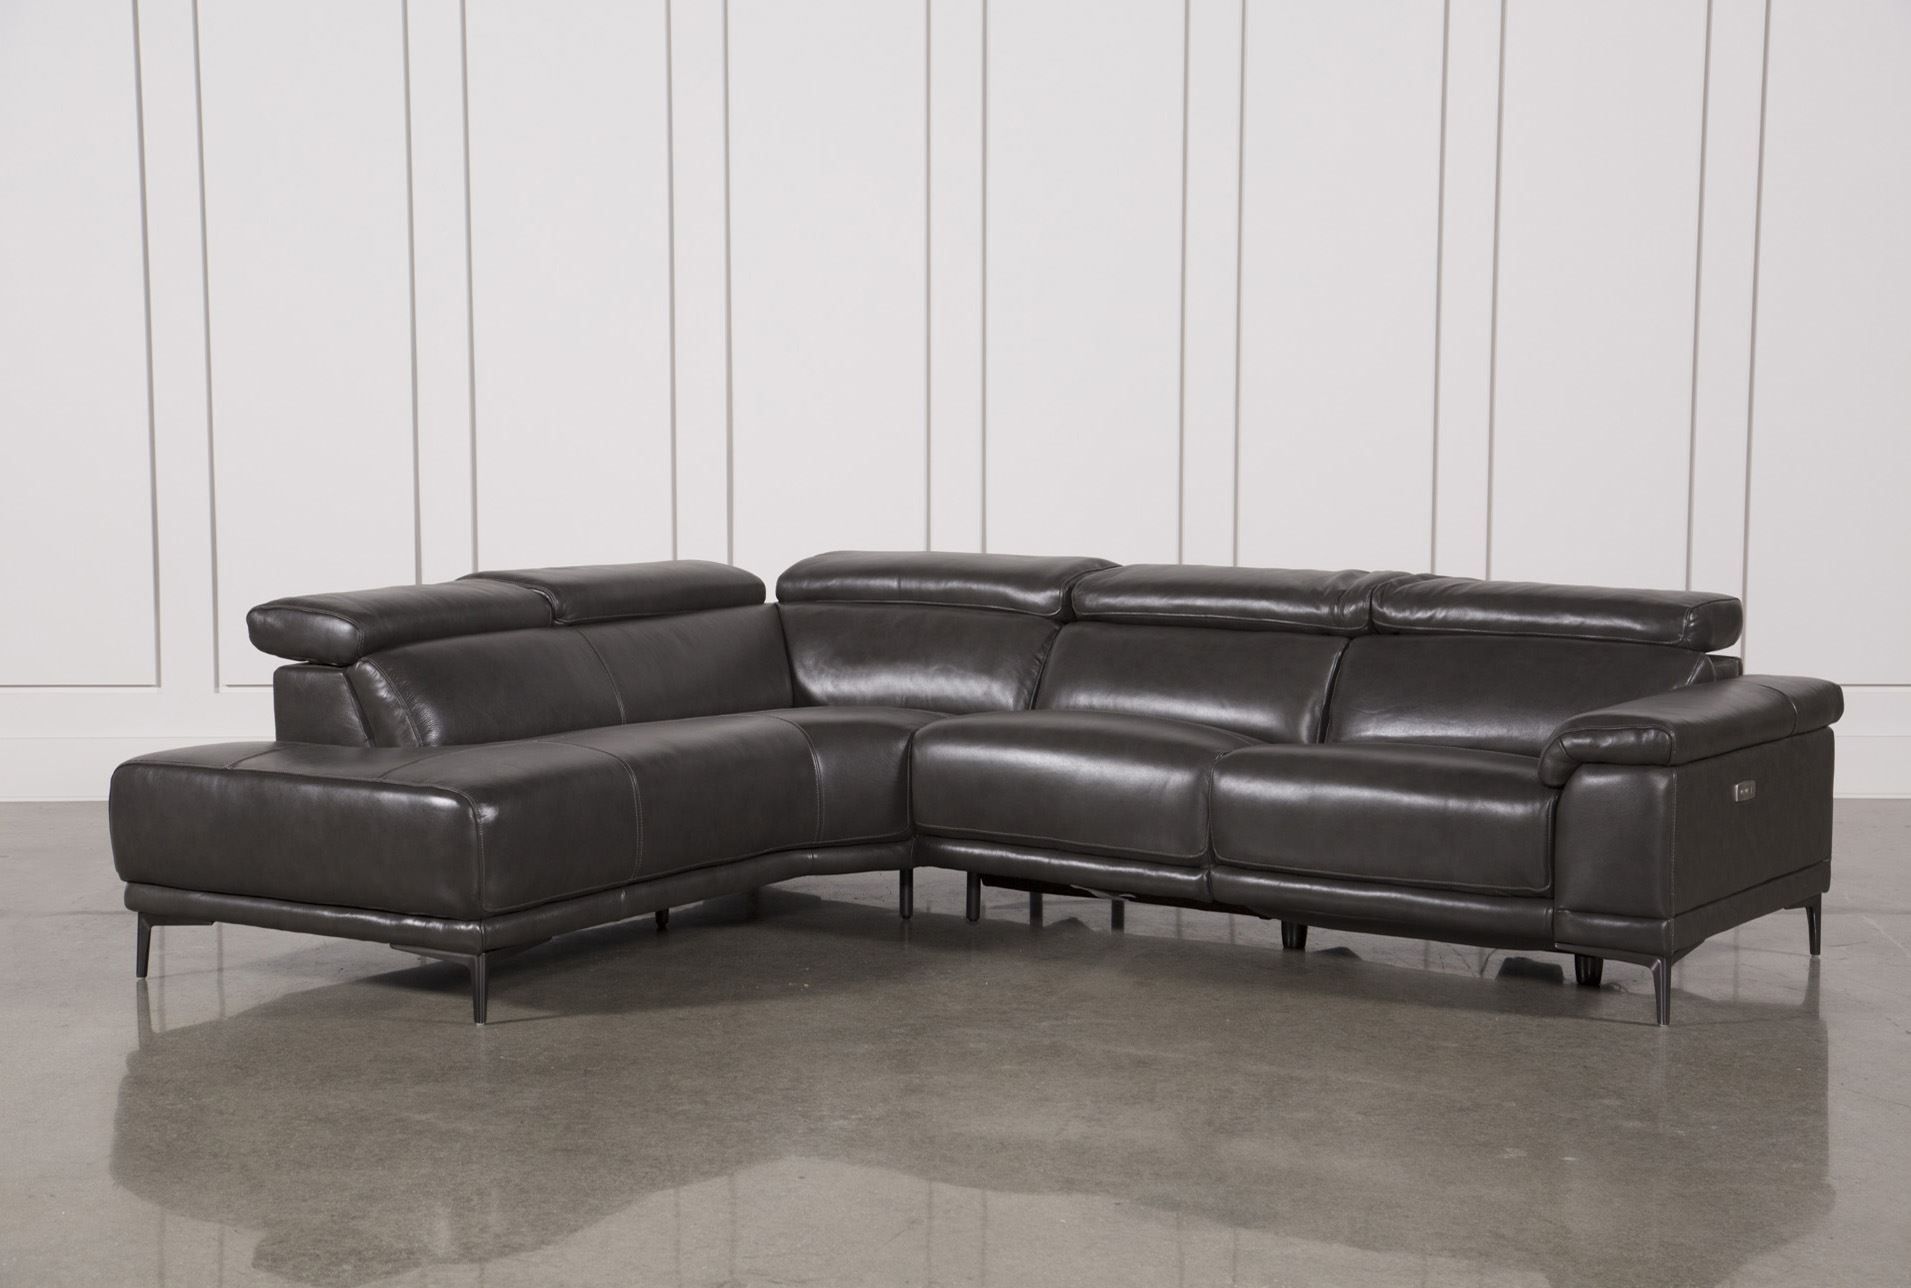 Tatum Dark Grey 2 Piece Sectional W/laf Chaise | Living Room For Turdur 2 Piece Sectionals With Raf Loveseat (View 4 of 30)